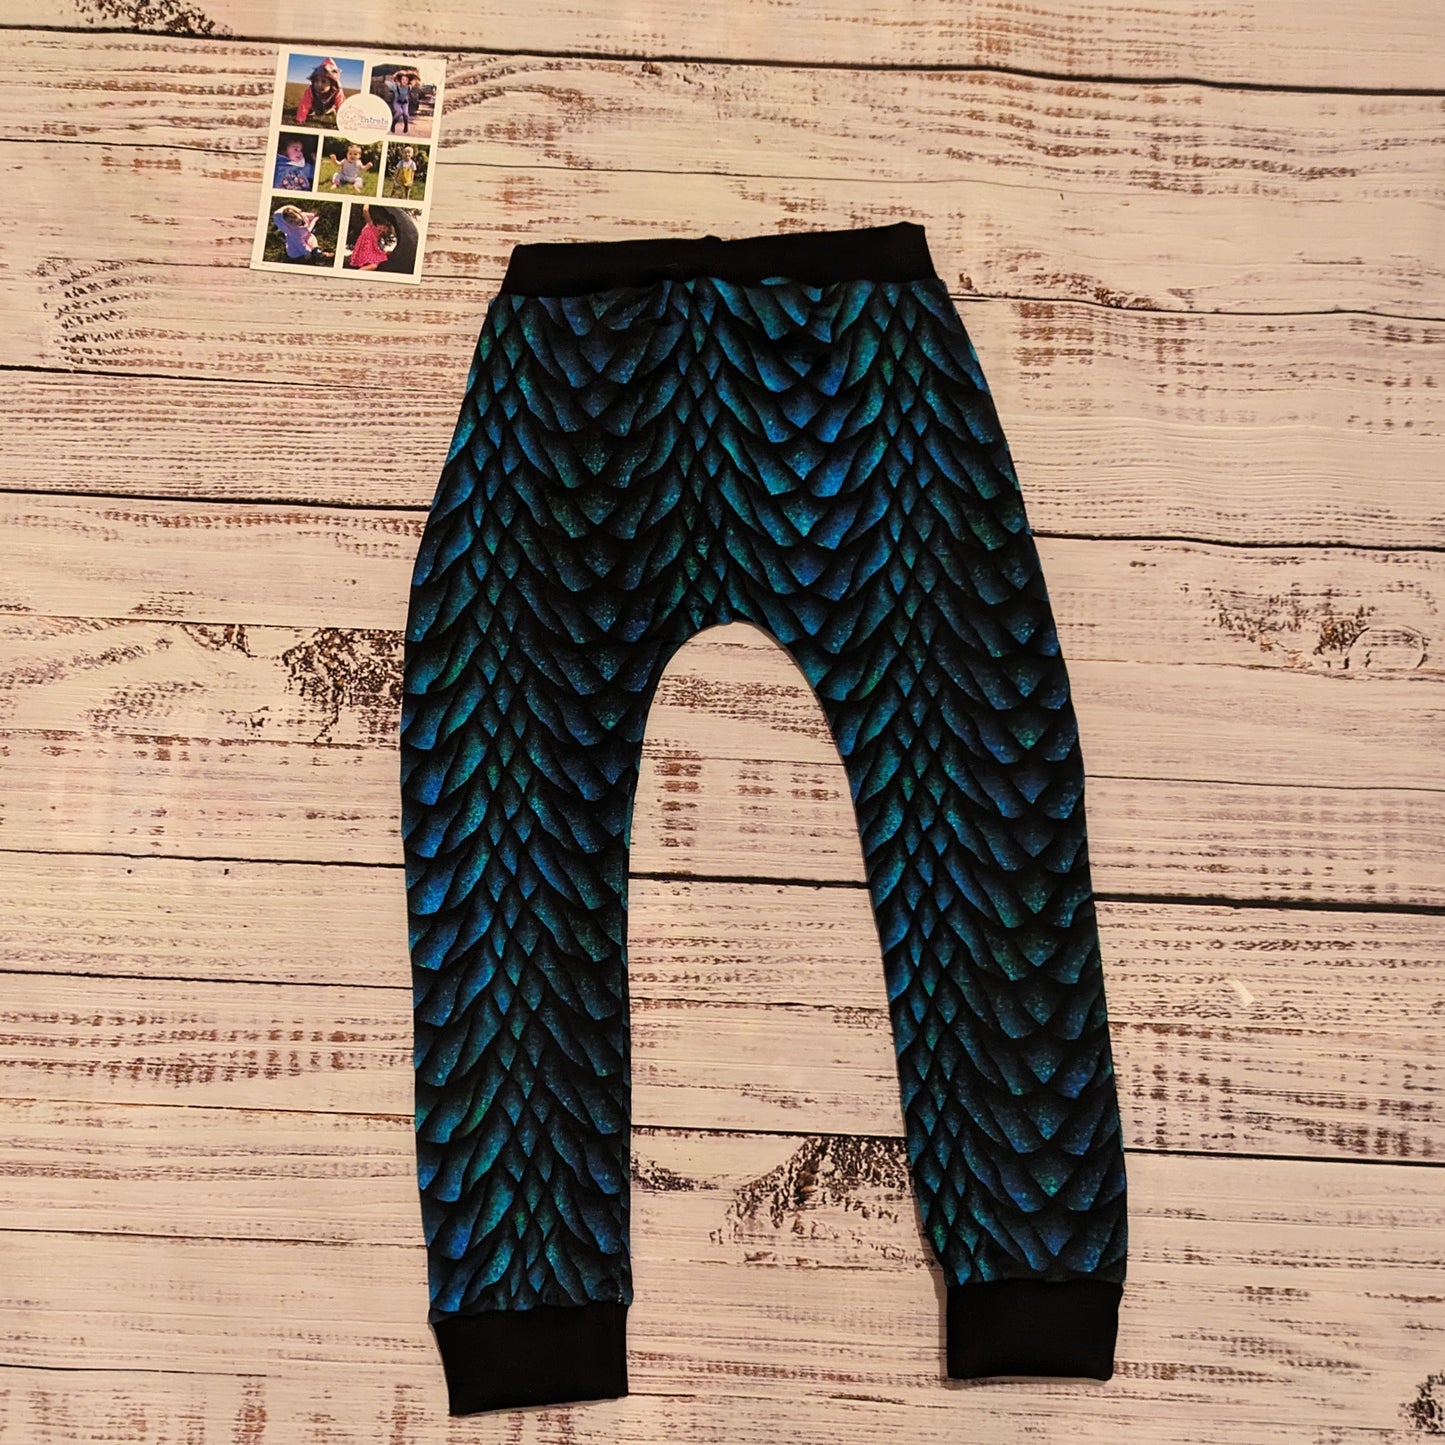 The gorgeously glimmering dragon scales harem joggers. Handmade using dragon scales cotton French terry and black cotton ribbing. Shown from the rear.